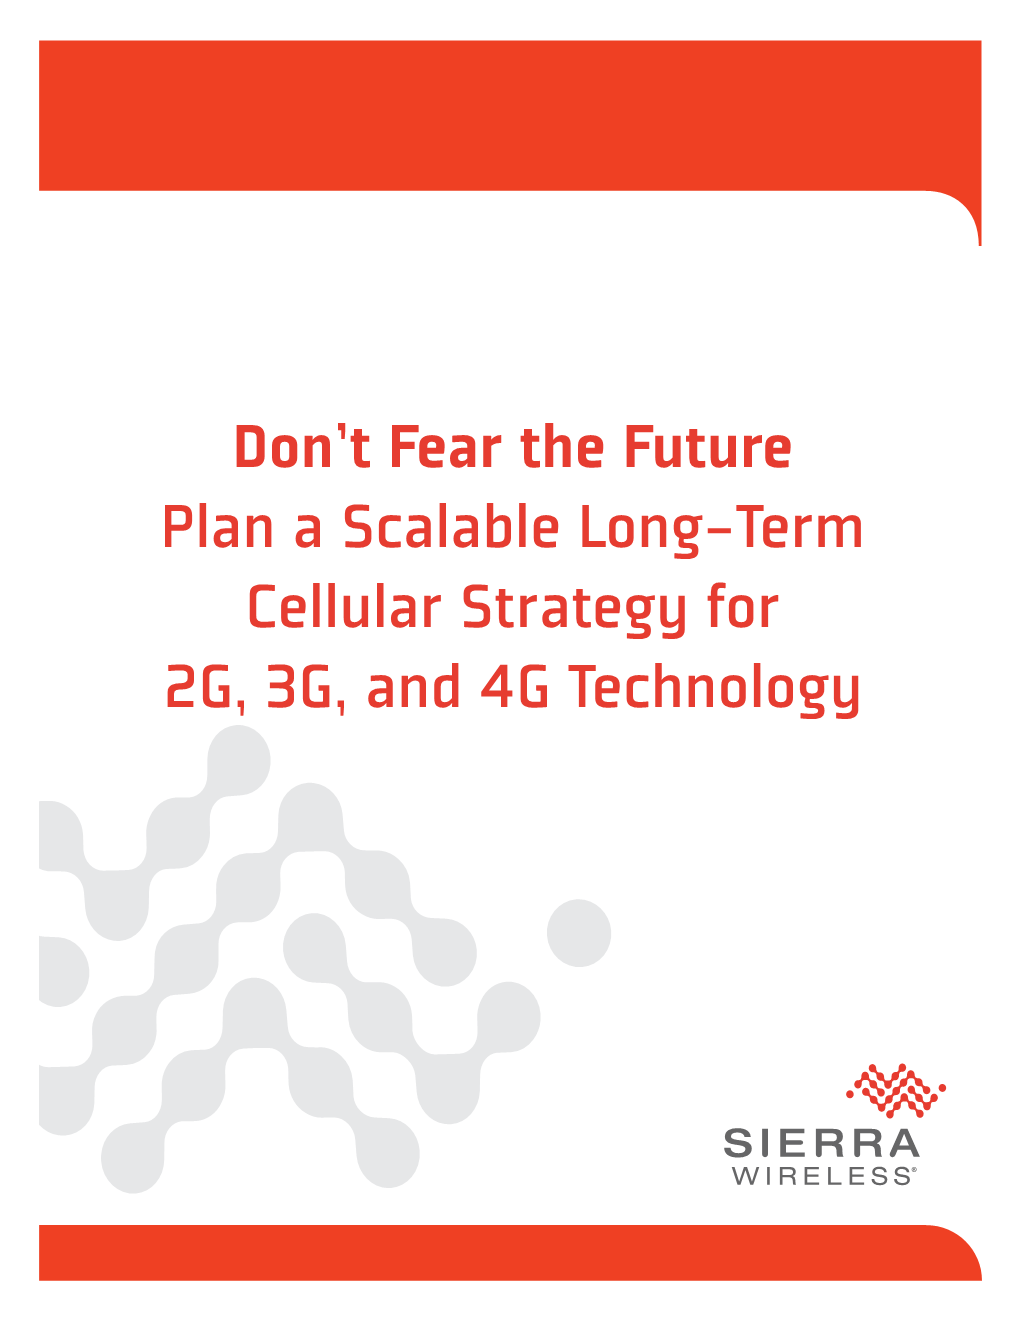 Don't Fear the Future Plan a Scalable Long-Term Cellular Strategy for 2G